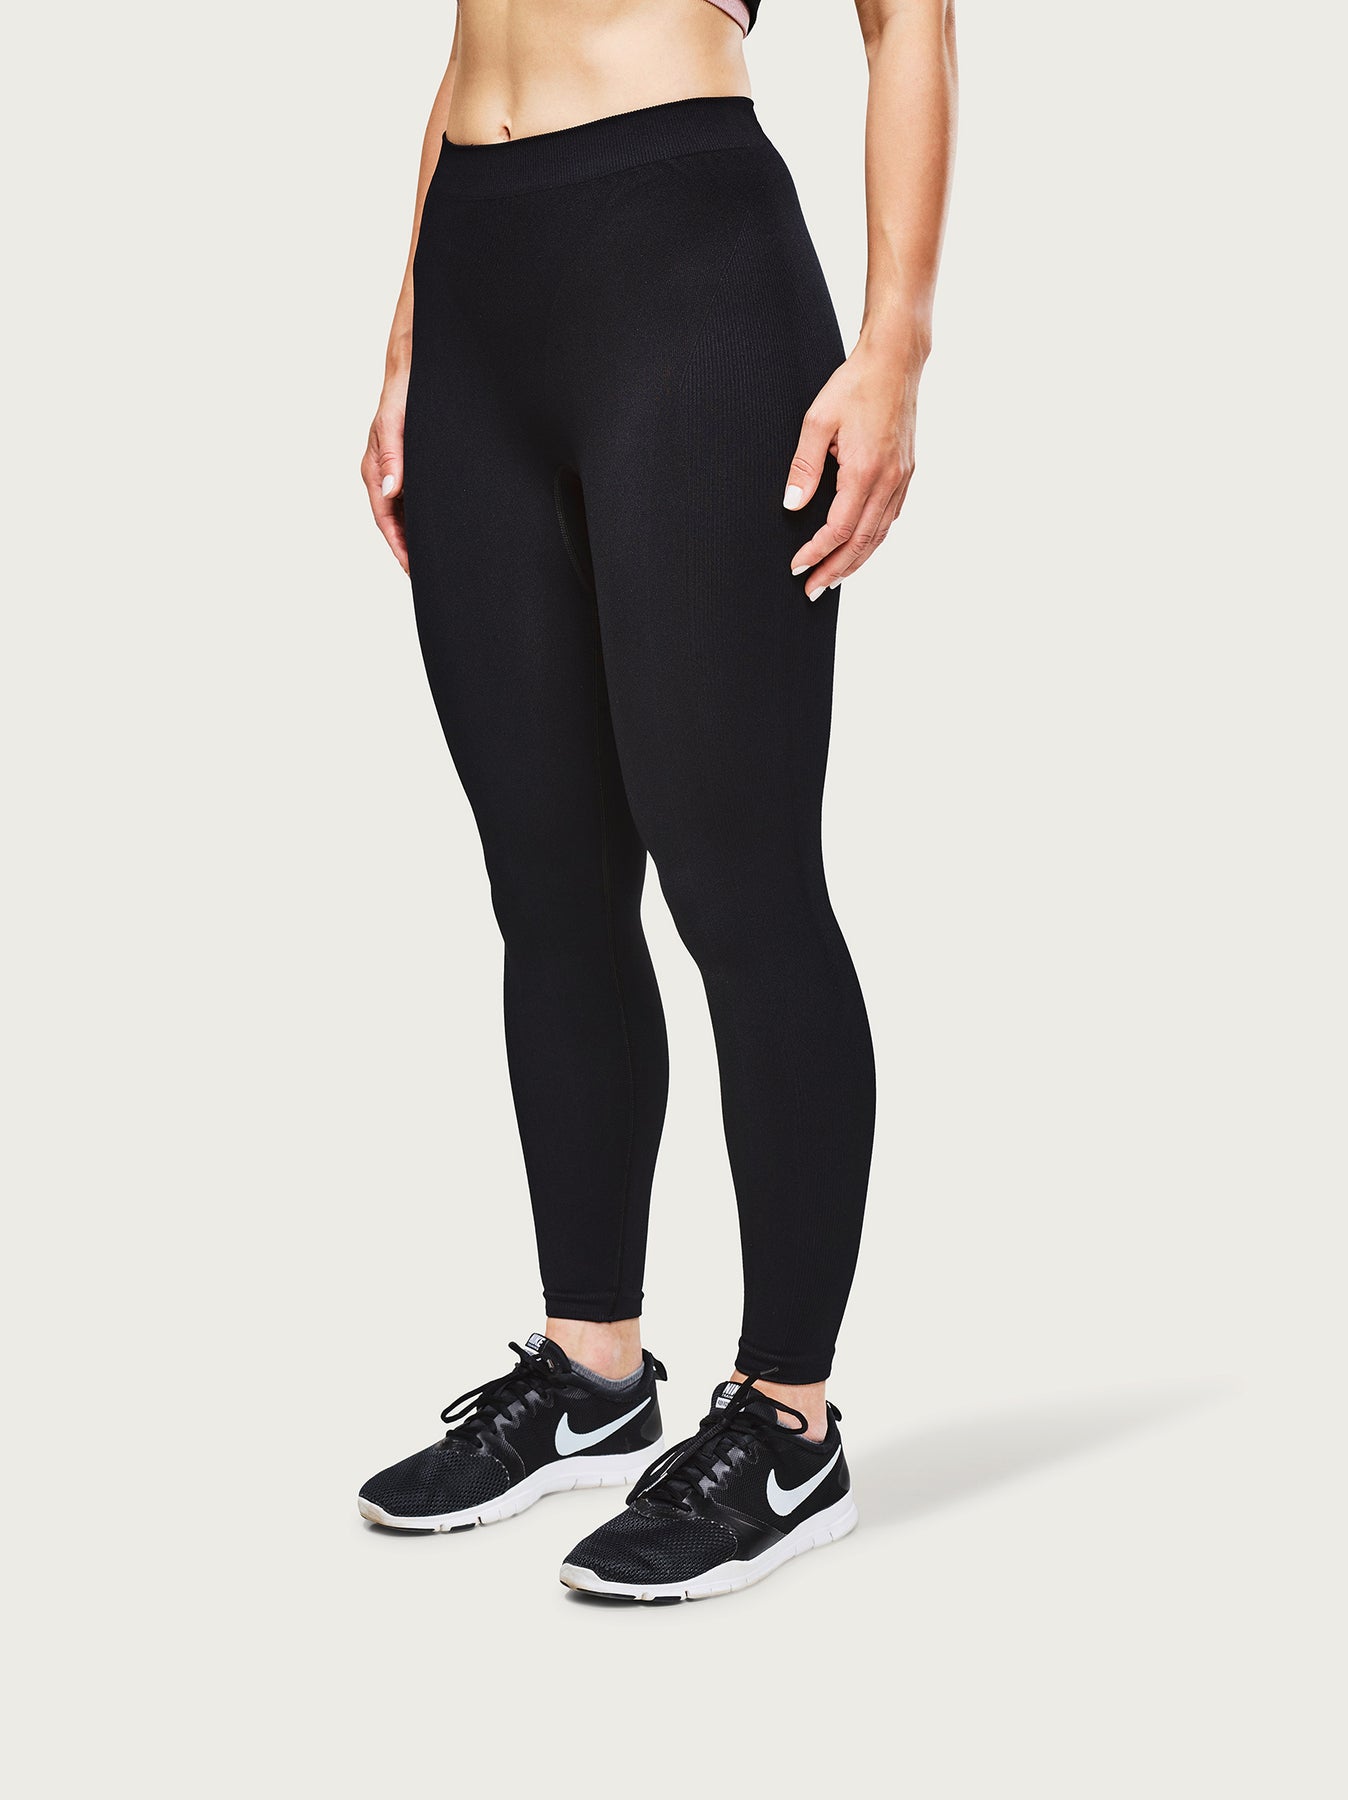 Womens Compression Tights – STRAMMER MAX PERFORMANCE®